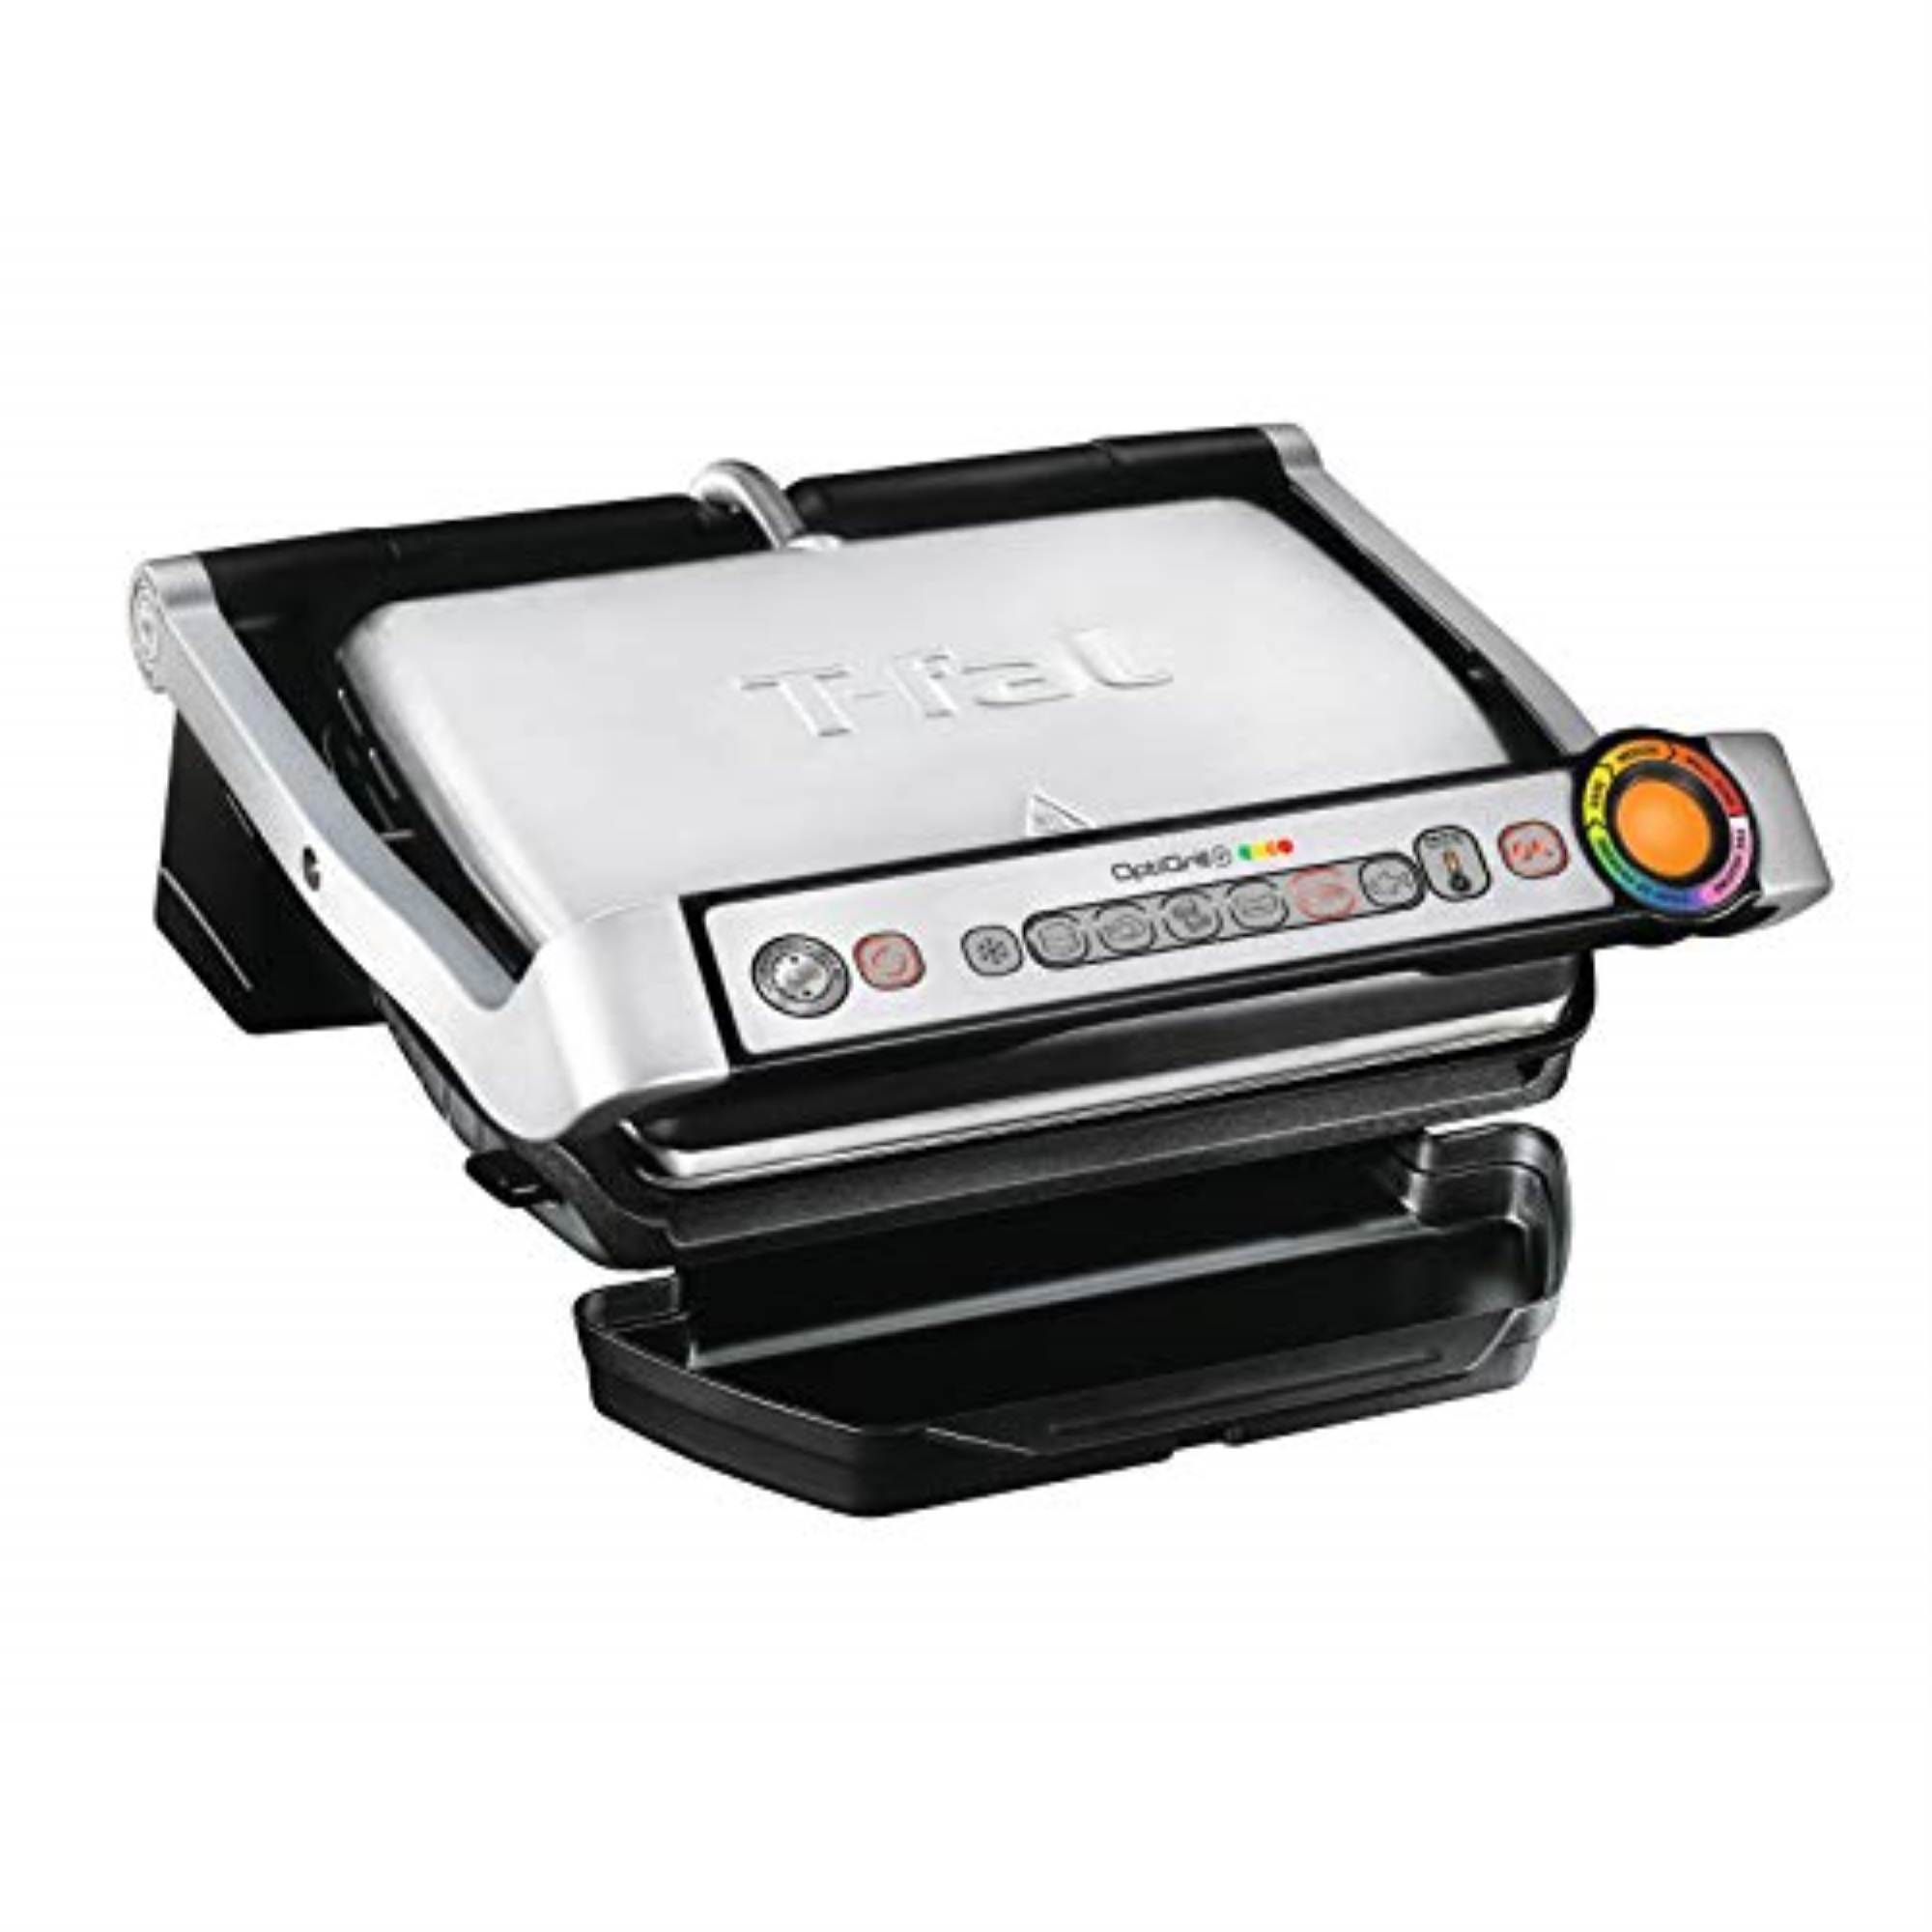 T-fal Opti Indoor Grill with Removable Plates & Precision Grilling Technology - image 1 of 7